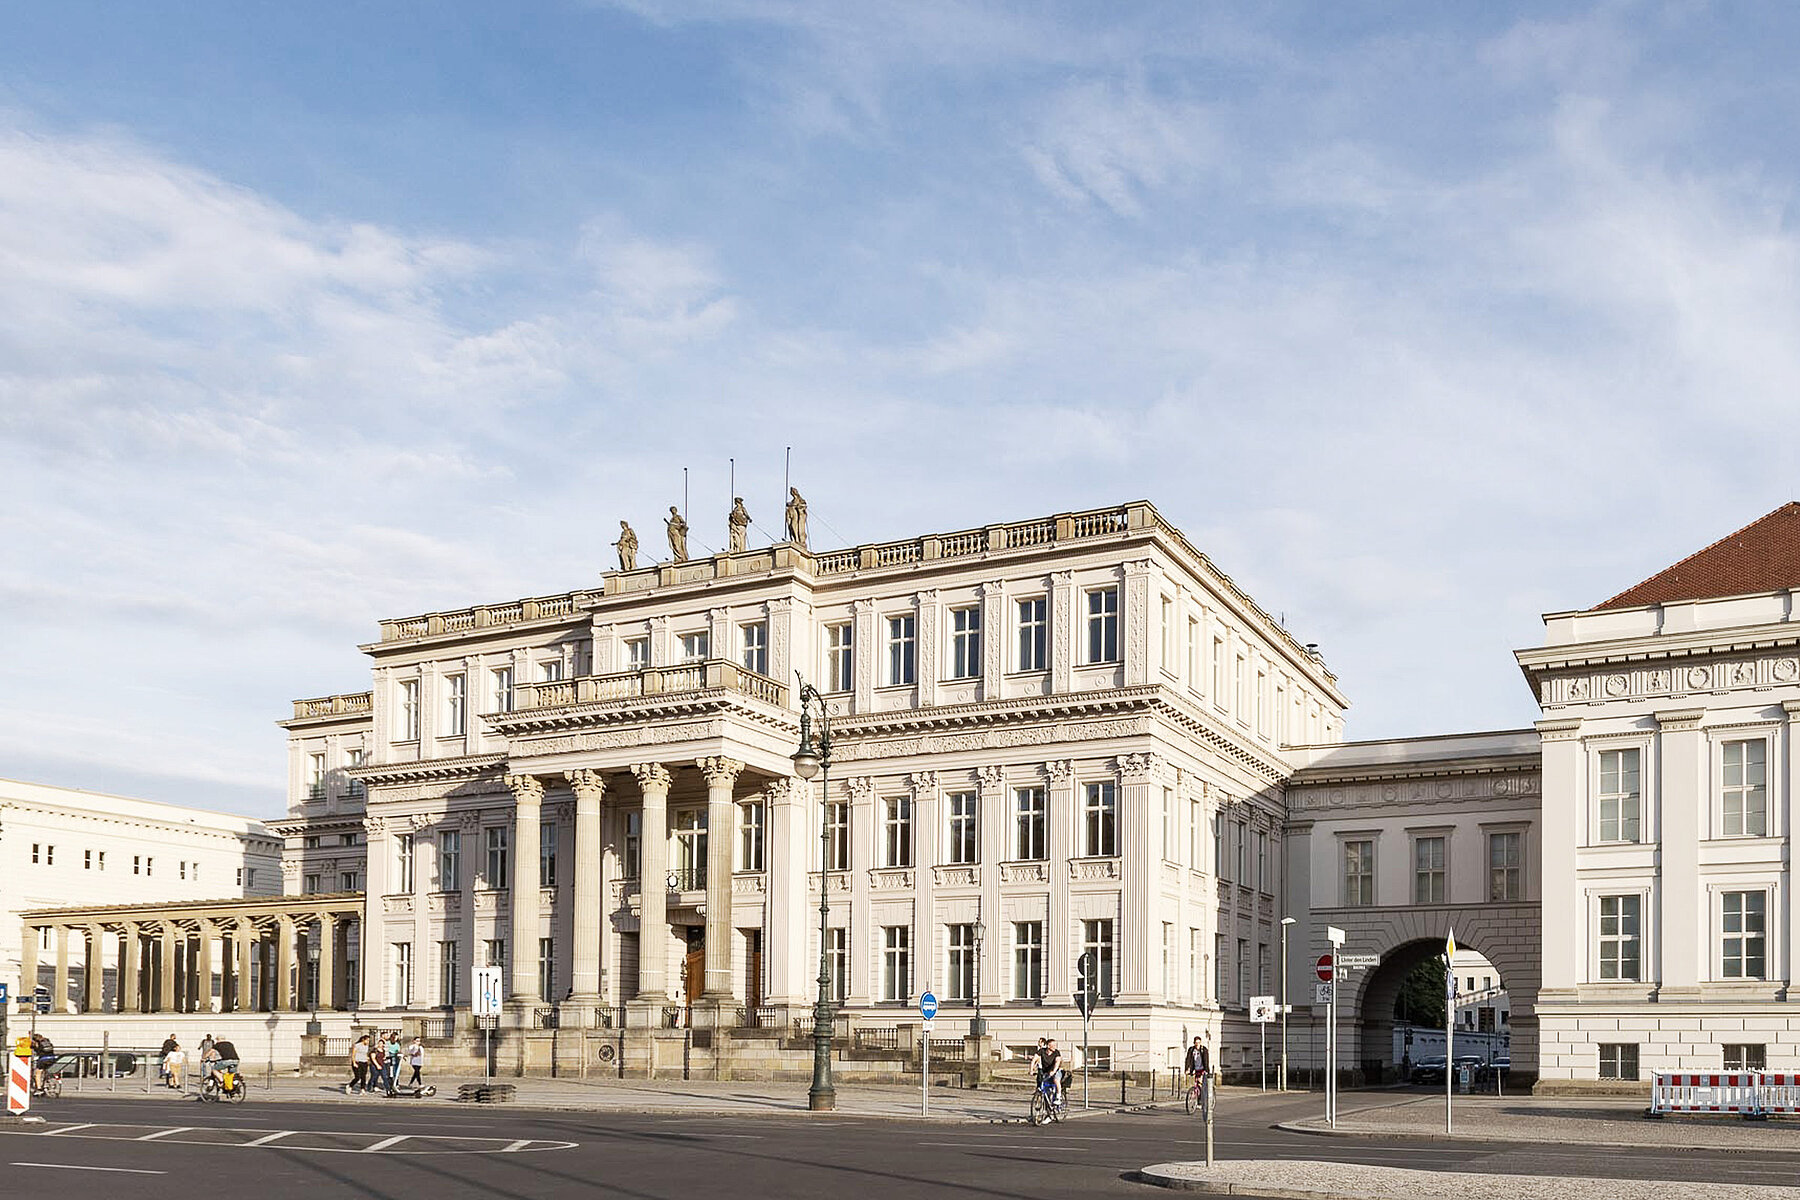 A view of the classicist Crown Prince's Palace. In front of it is the empty boulevard Unter den Linden.